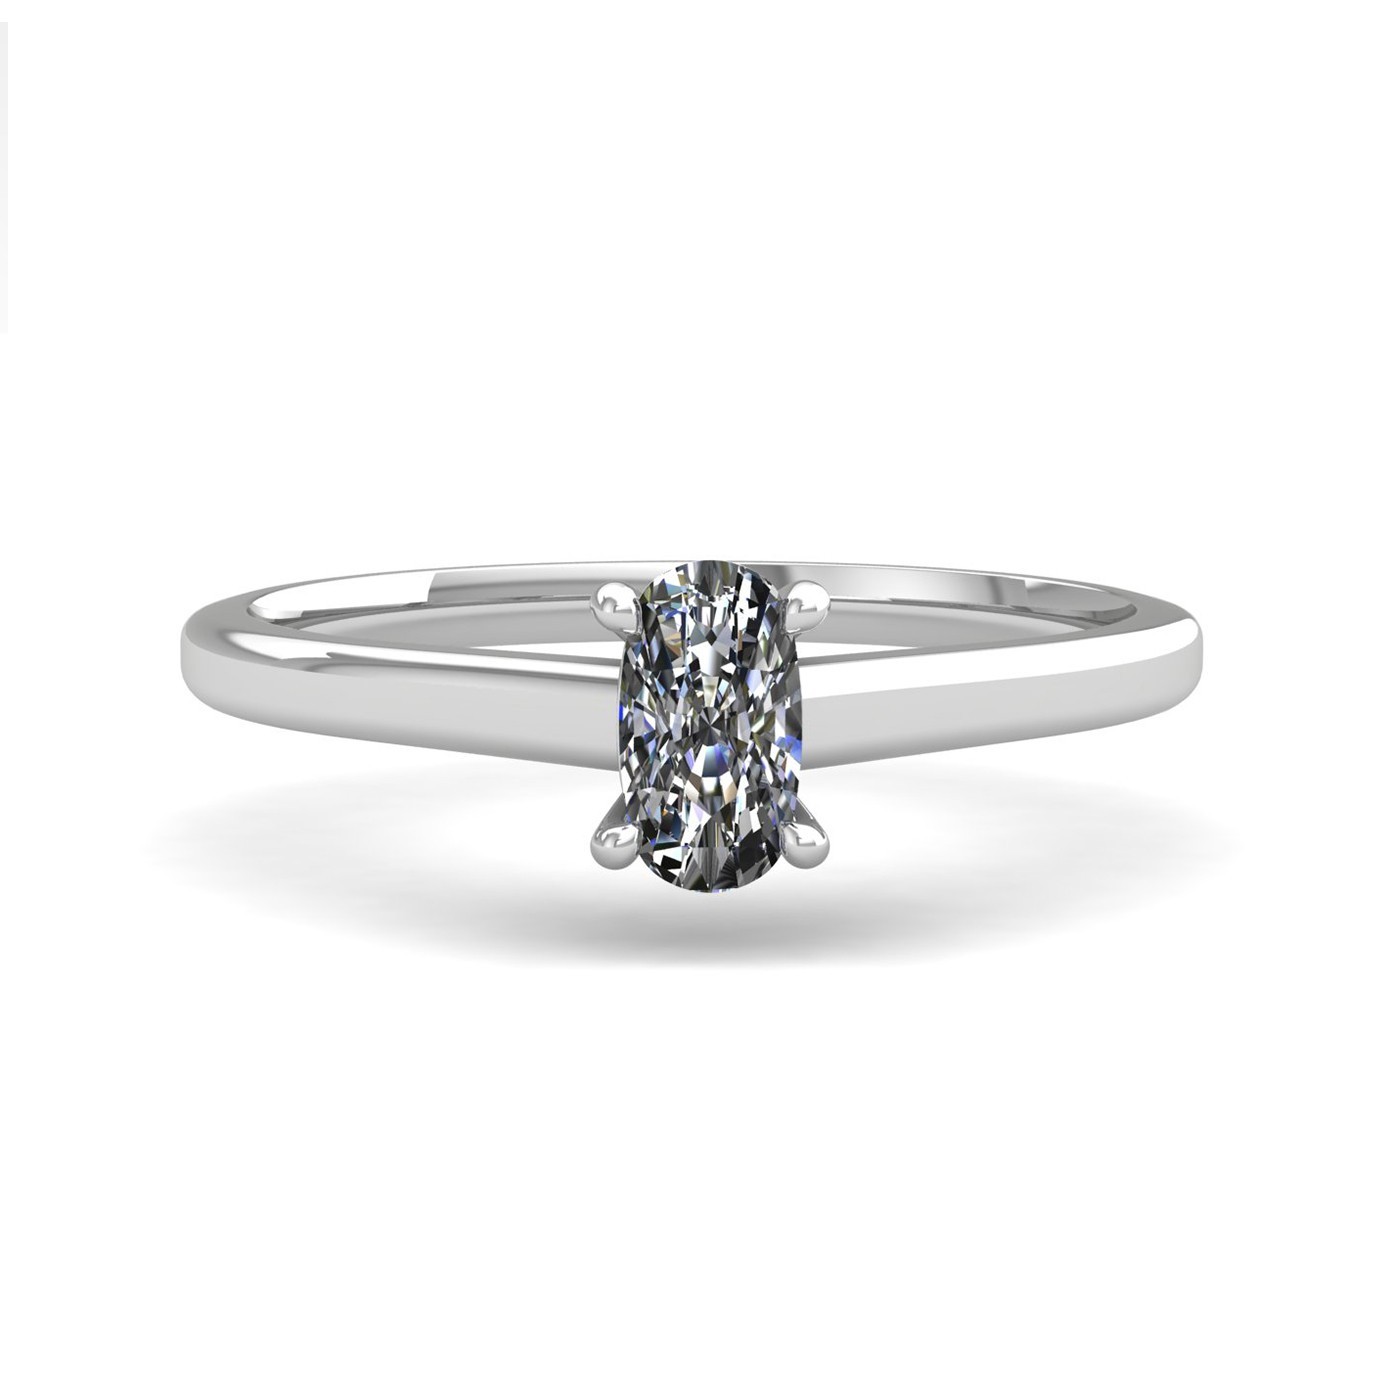 18k white gold  0,30 ct 4 prongs solitaire elongated cushion cut diamond engagement ring with whisper thin band